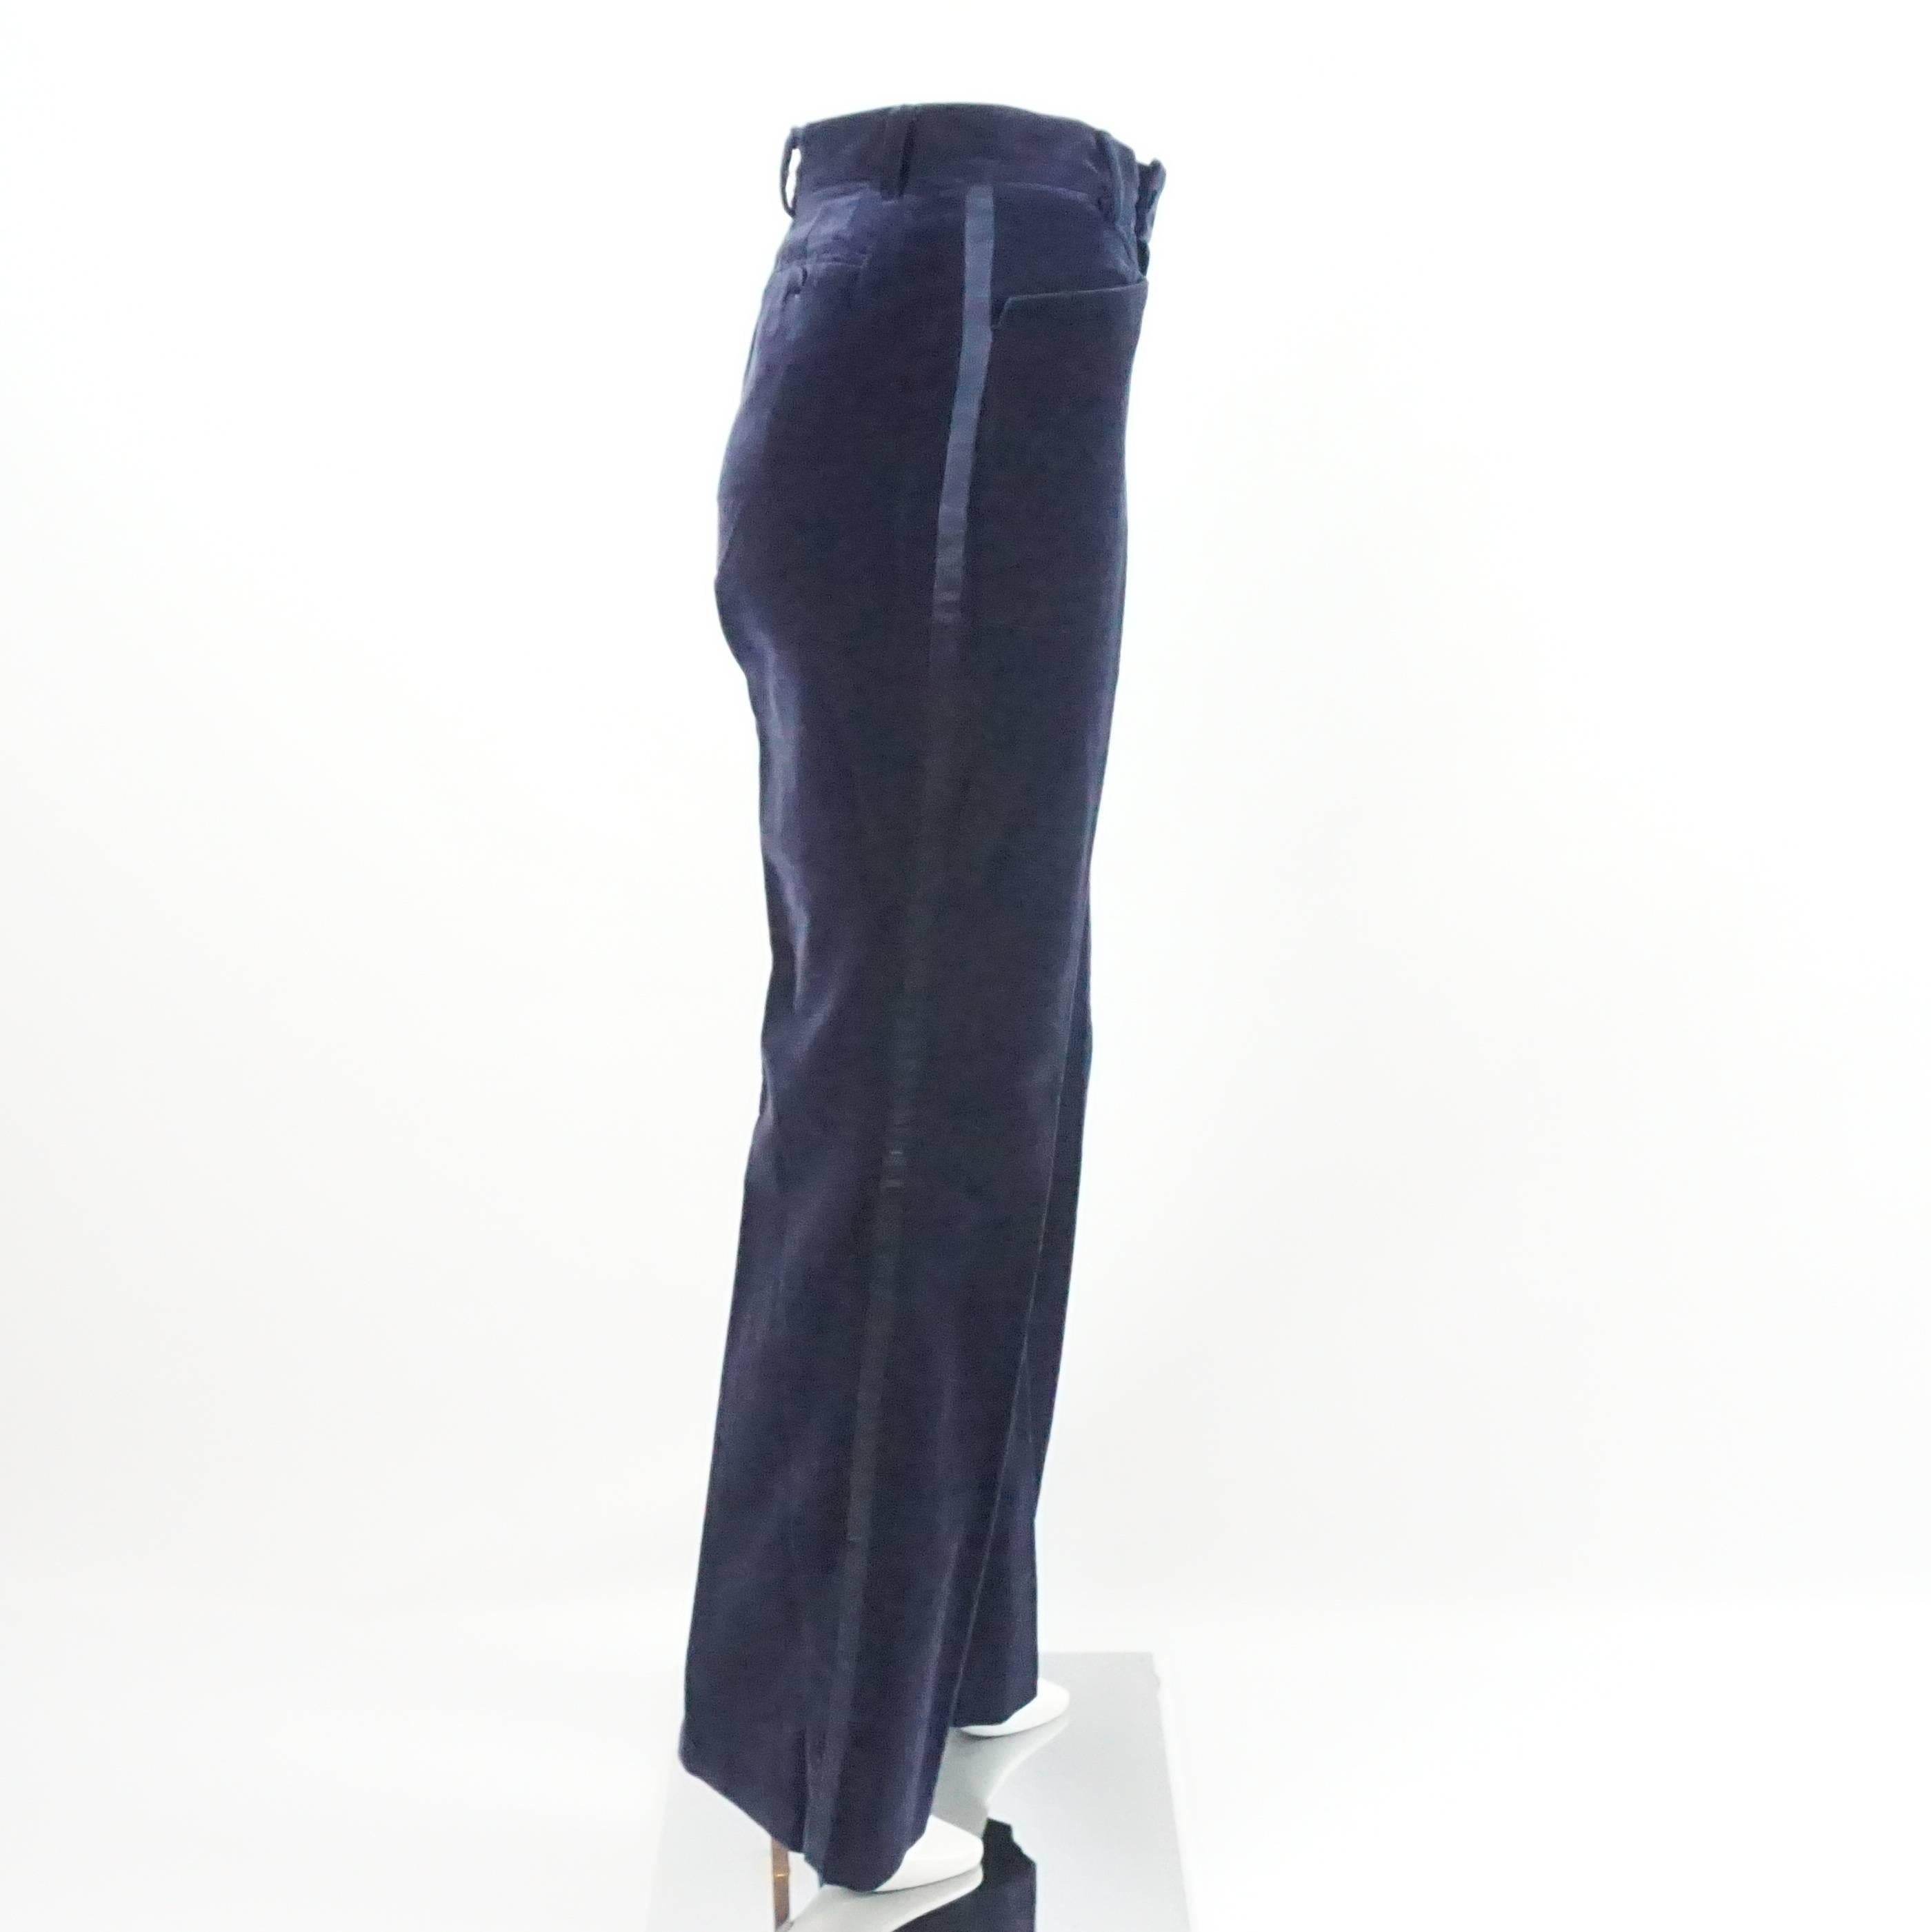 Gucci Navy Velvet High Waisted Pants with Silk Sides - 42 - 1990's. These vintage pants are back in style. They have a flare leg with silk stripes down both sides, 2 front pockets,and 2 back pockets. The pants are in good condition with light wear